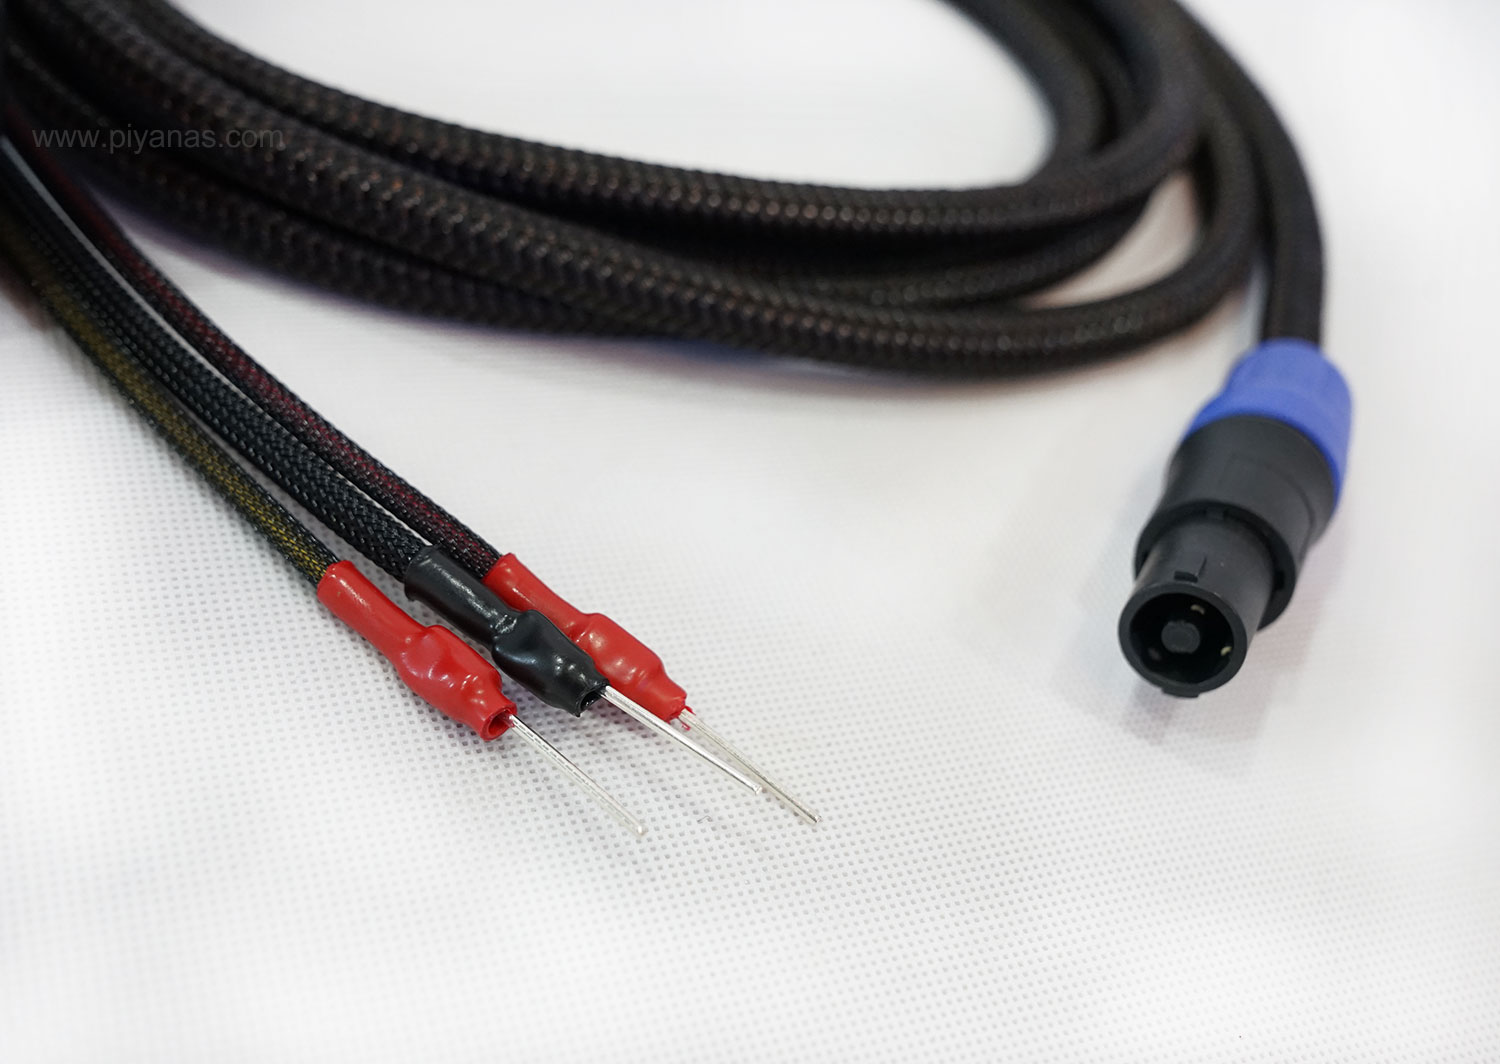 Type-5 (REL Sub Cable) (3.0M)